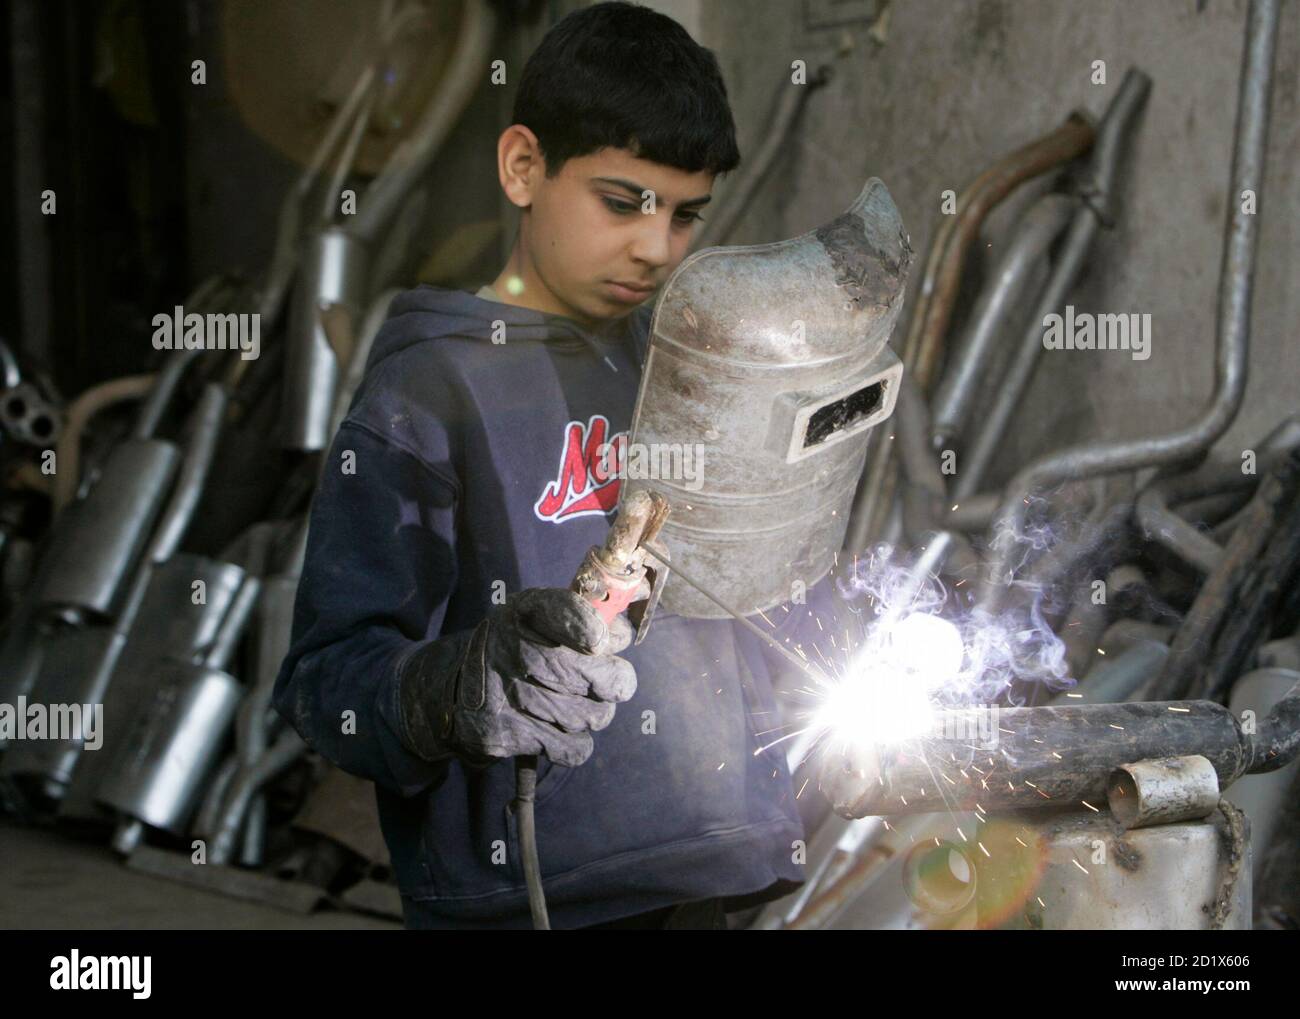 Abdullah Monther 13 Year Old Welds At A Shop Selling Vehicles Exhaust Pipes In Arbil About 350 Km 2 Miles North Of Baghdad March 1 08 Abdullah An Arabic Shi Ite Resident Dropped Out From